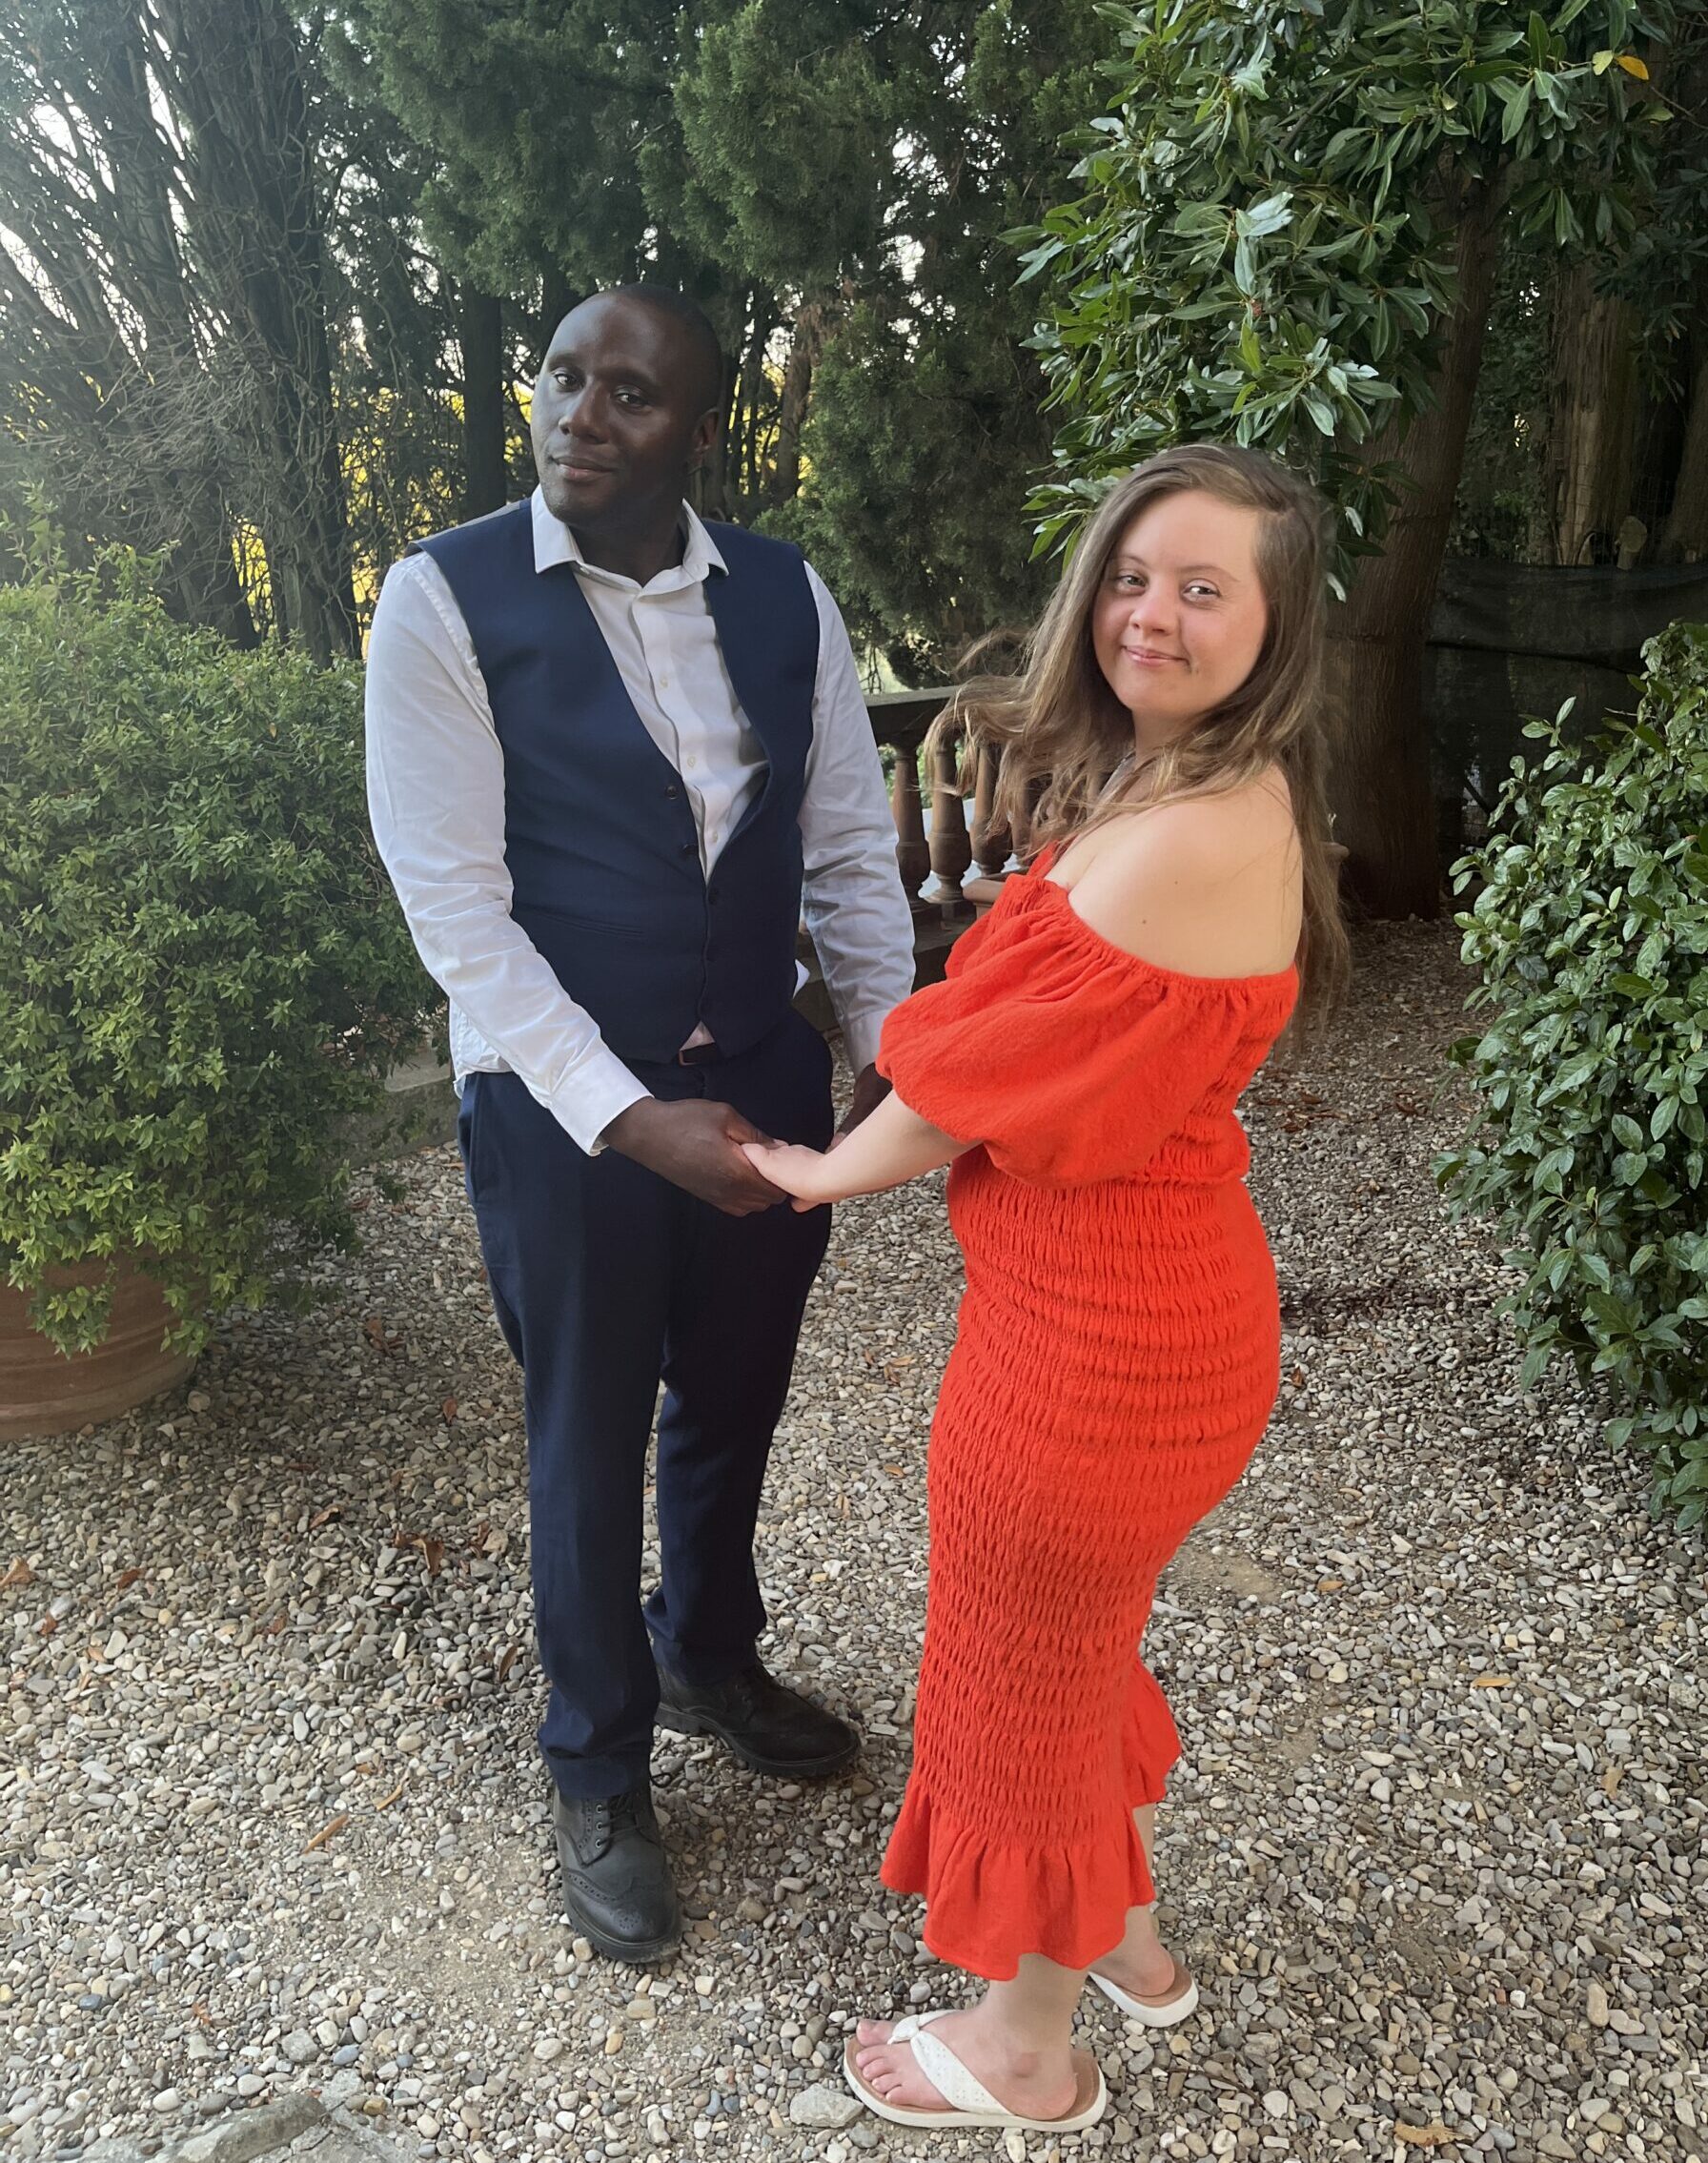 Young woman in red dress and man in a suit